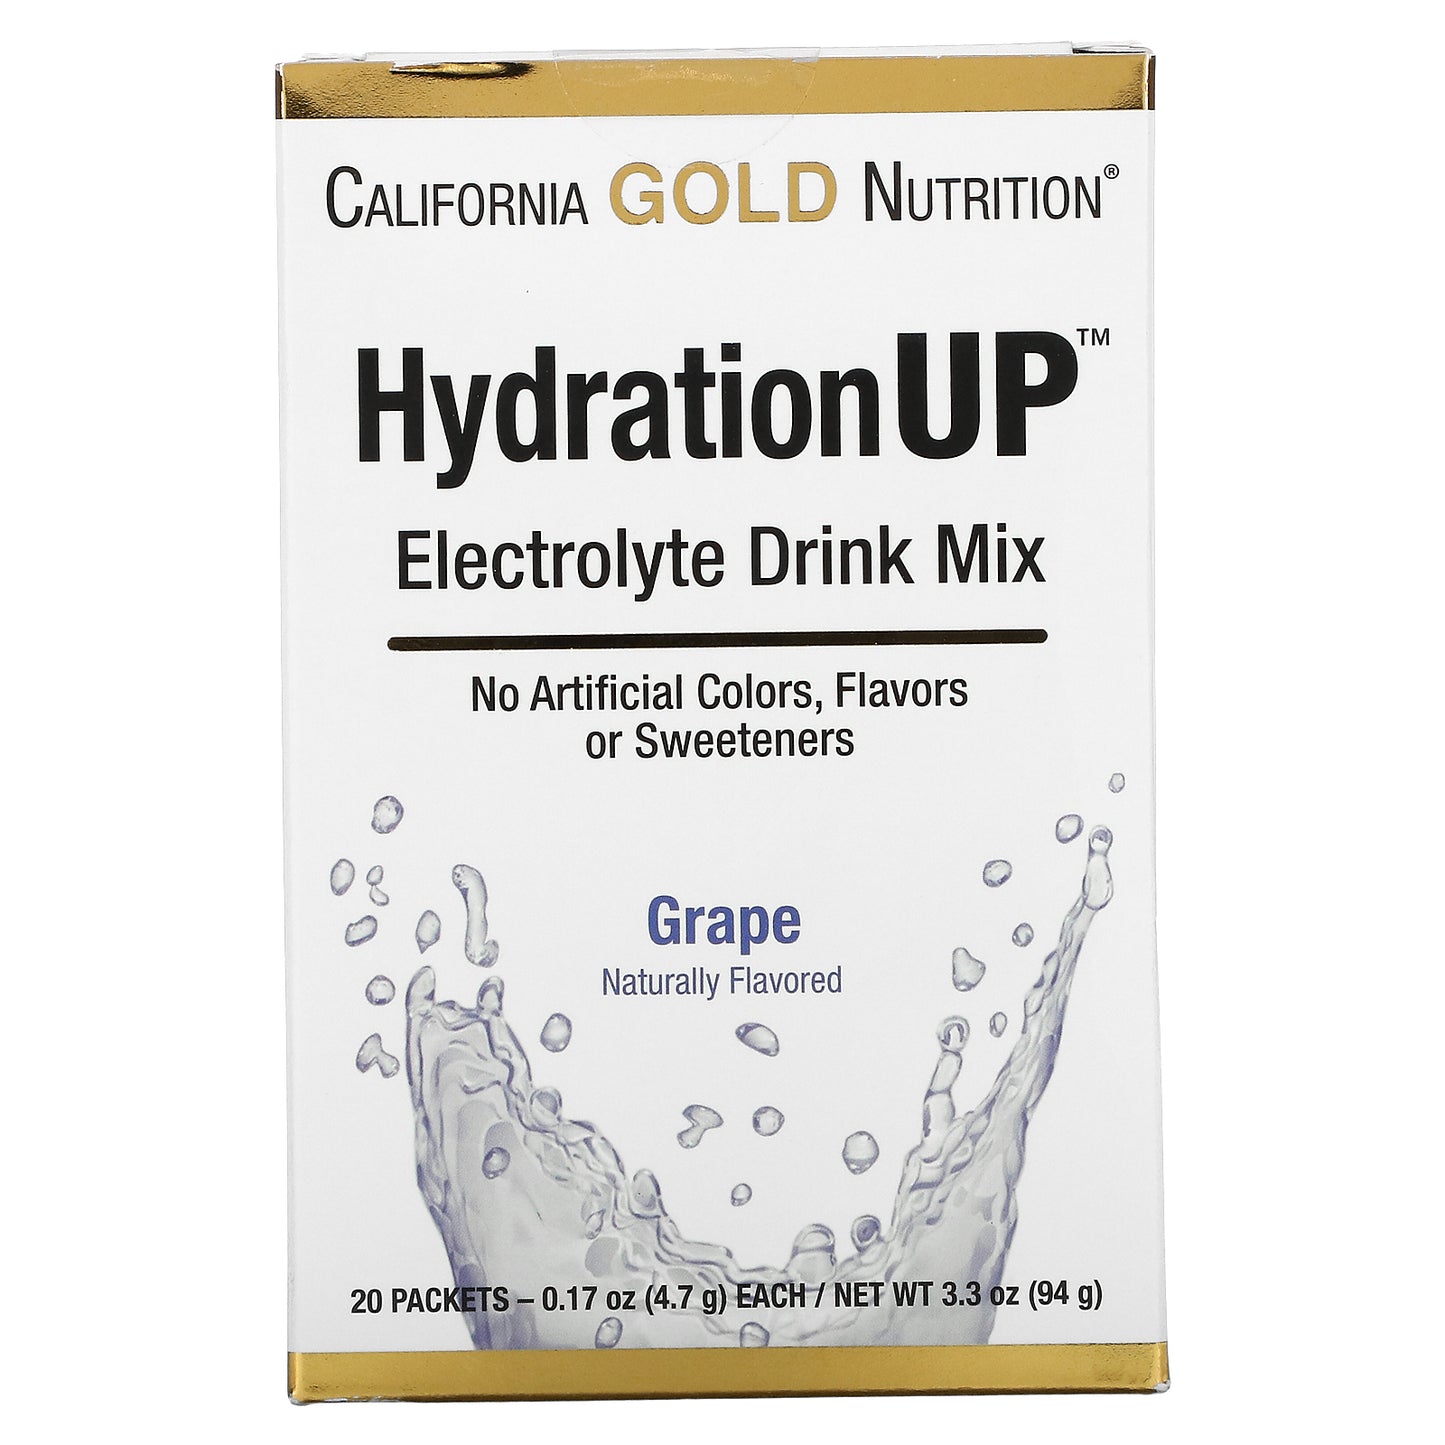 California Gold Nutrition, HydrationUP, Electrolyte Drink Mix, Grape, 20 Packets, 0.17 oz (4.7 g) Each